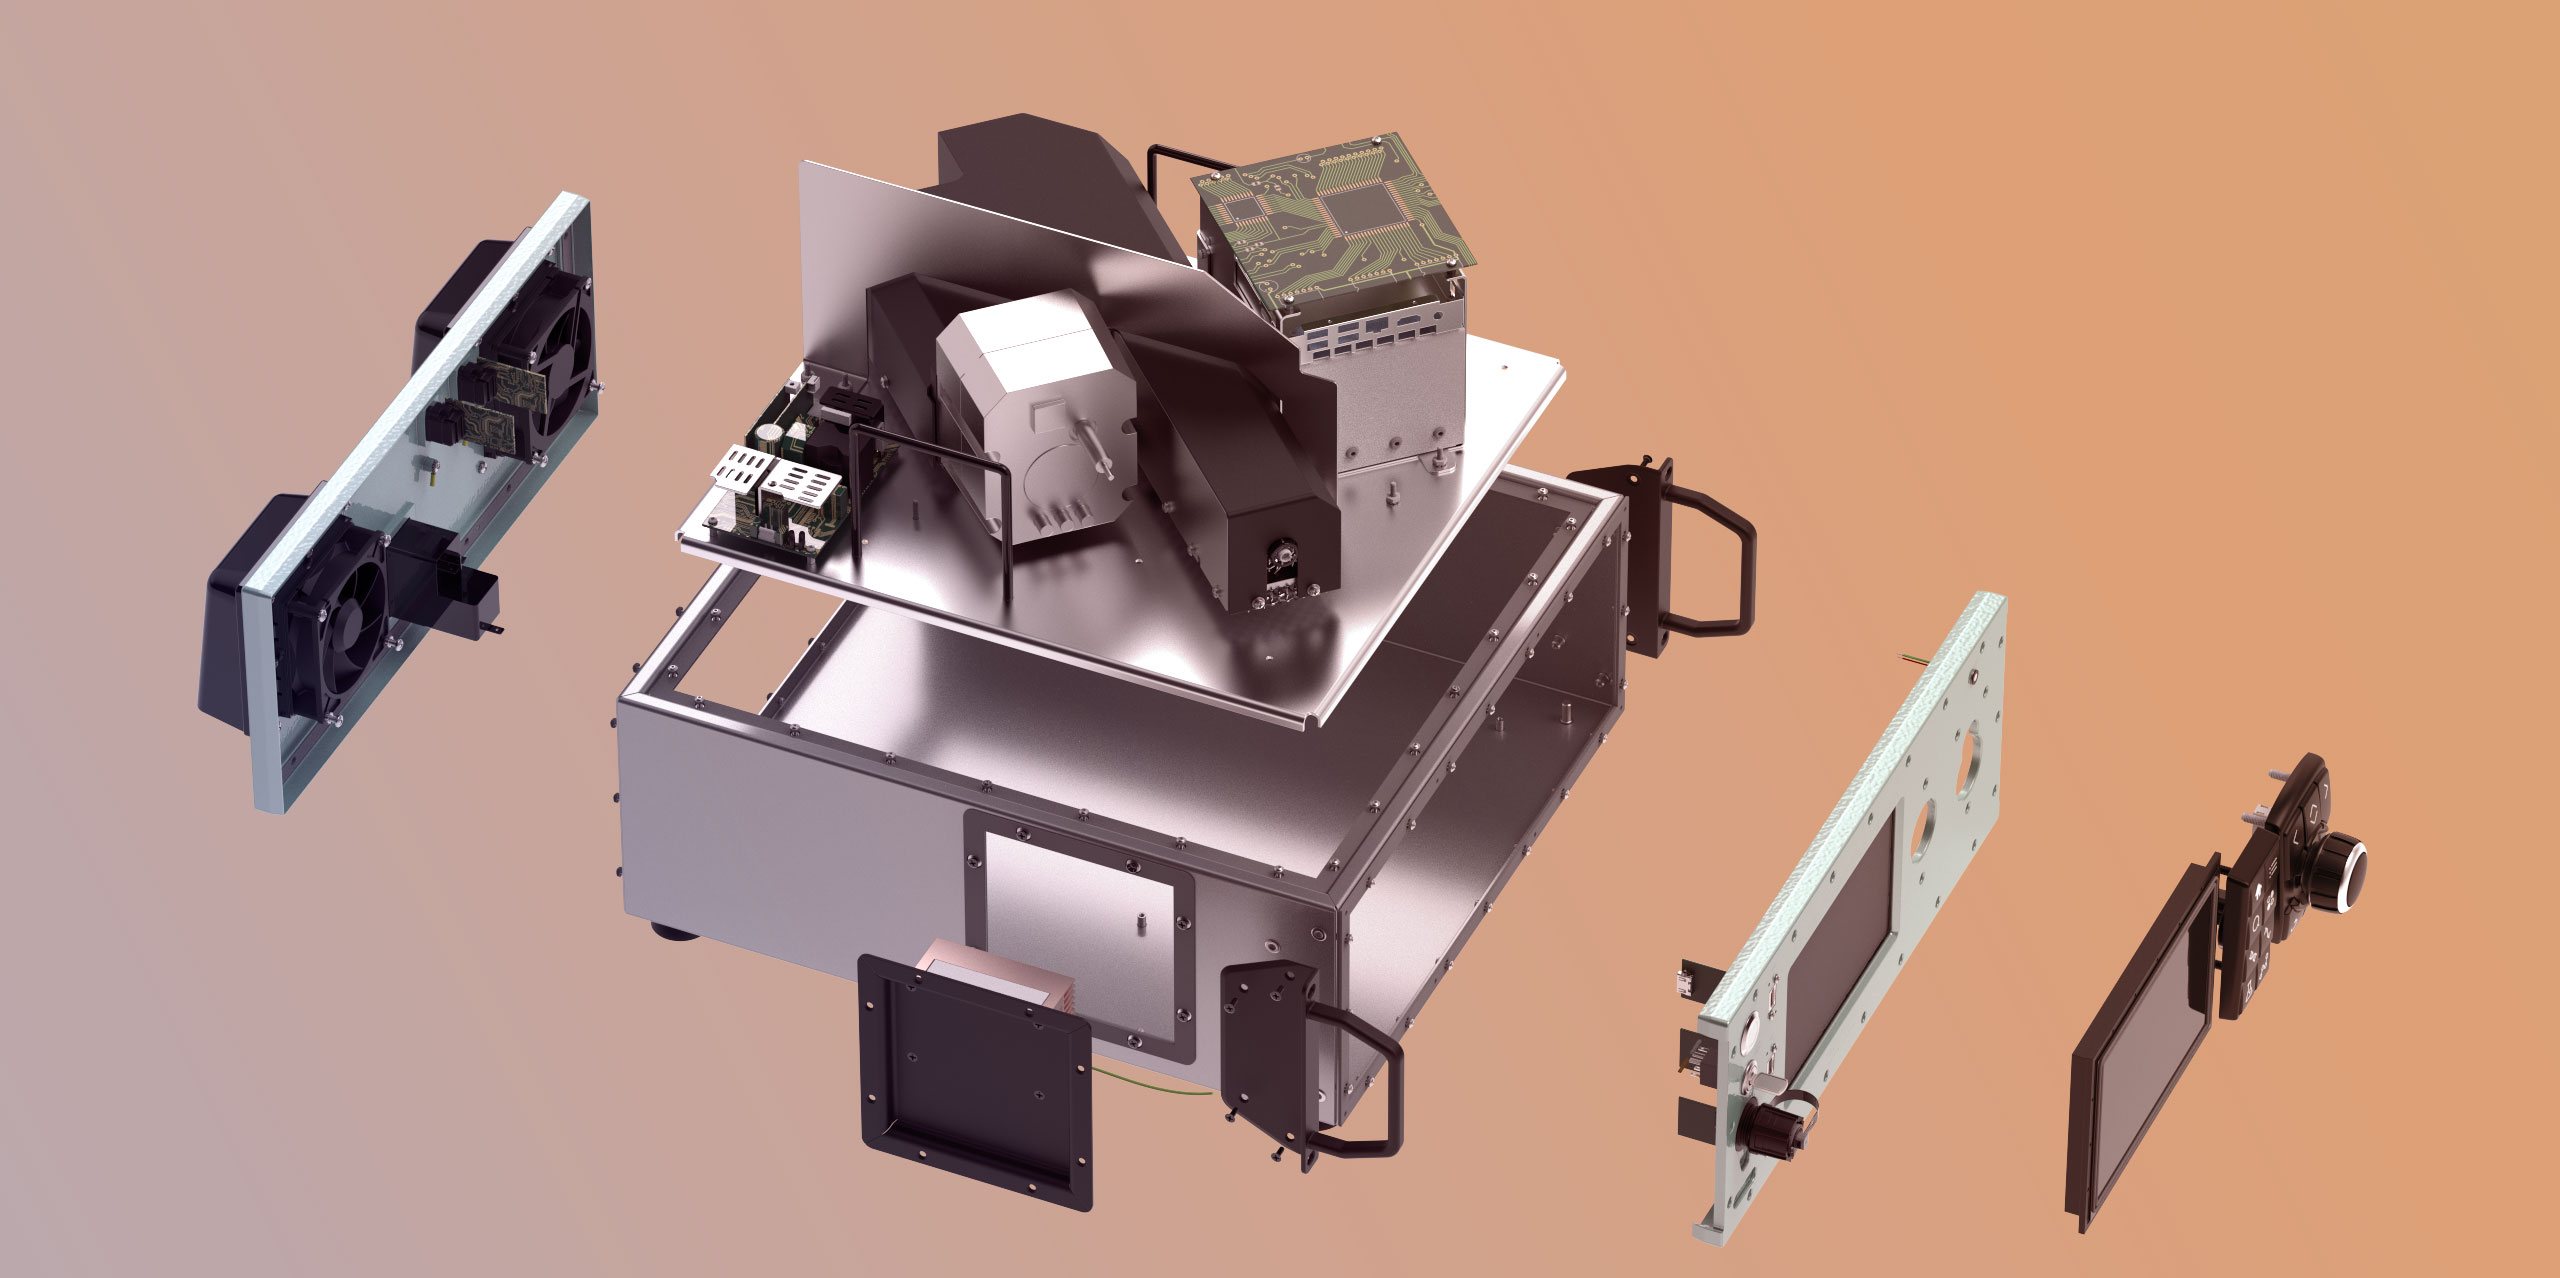  Spectrometer Enclosure | Exploded View